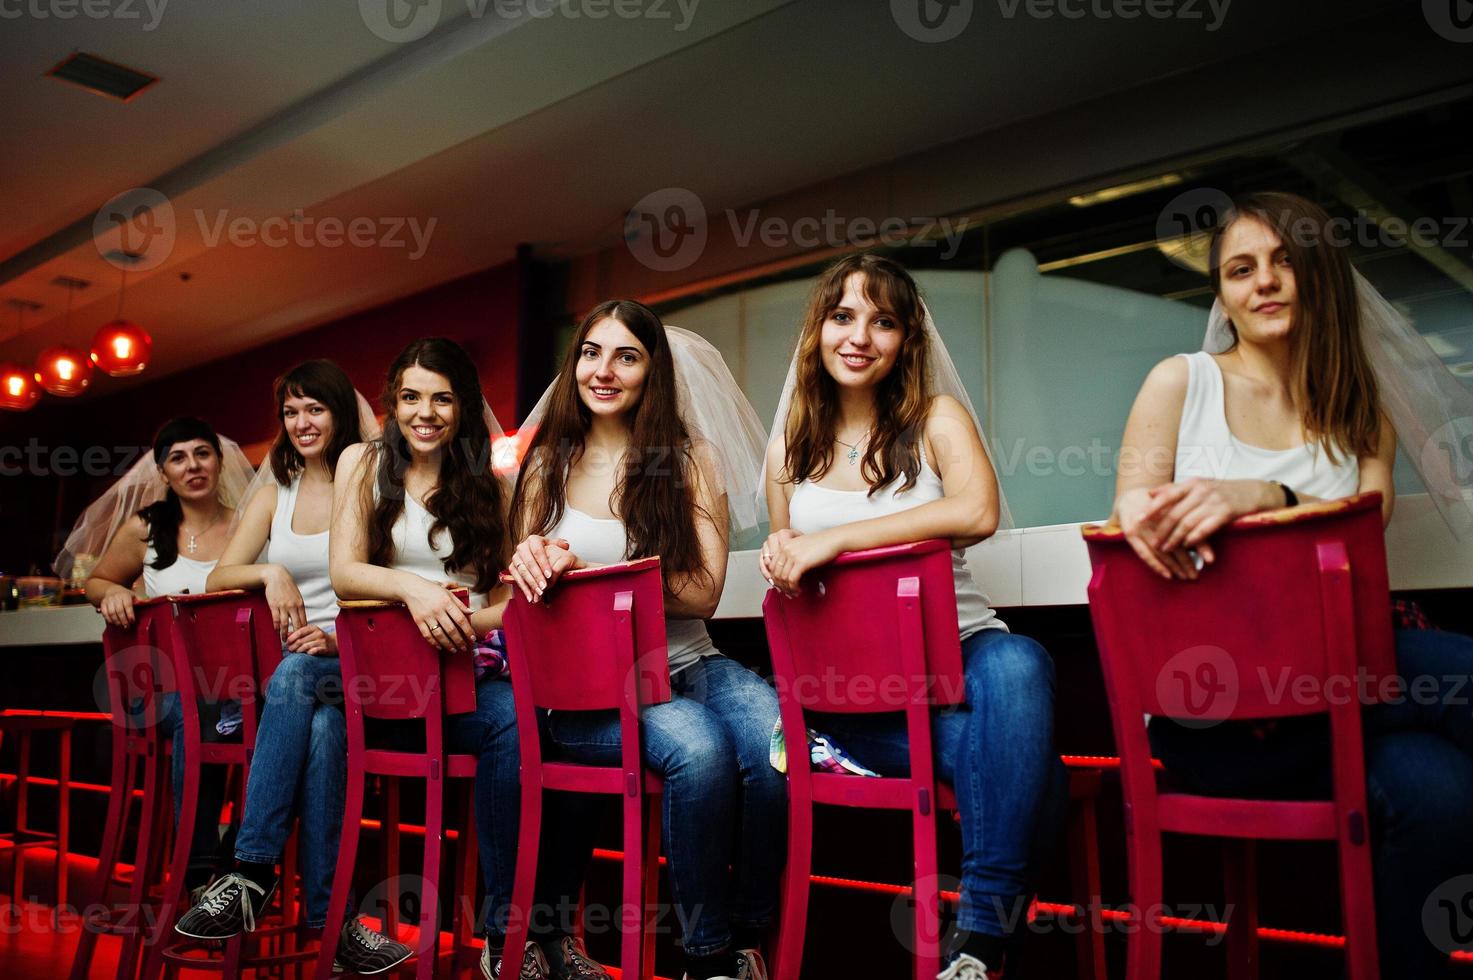 Six girls on veil sit at the bar stools on hen party. photo